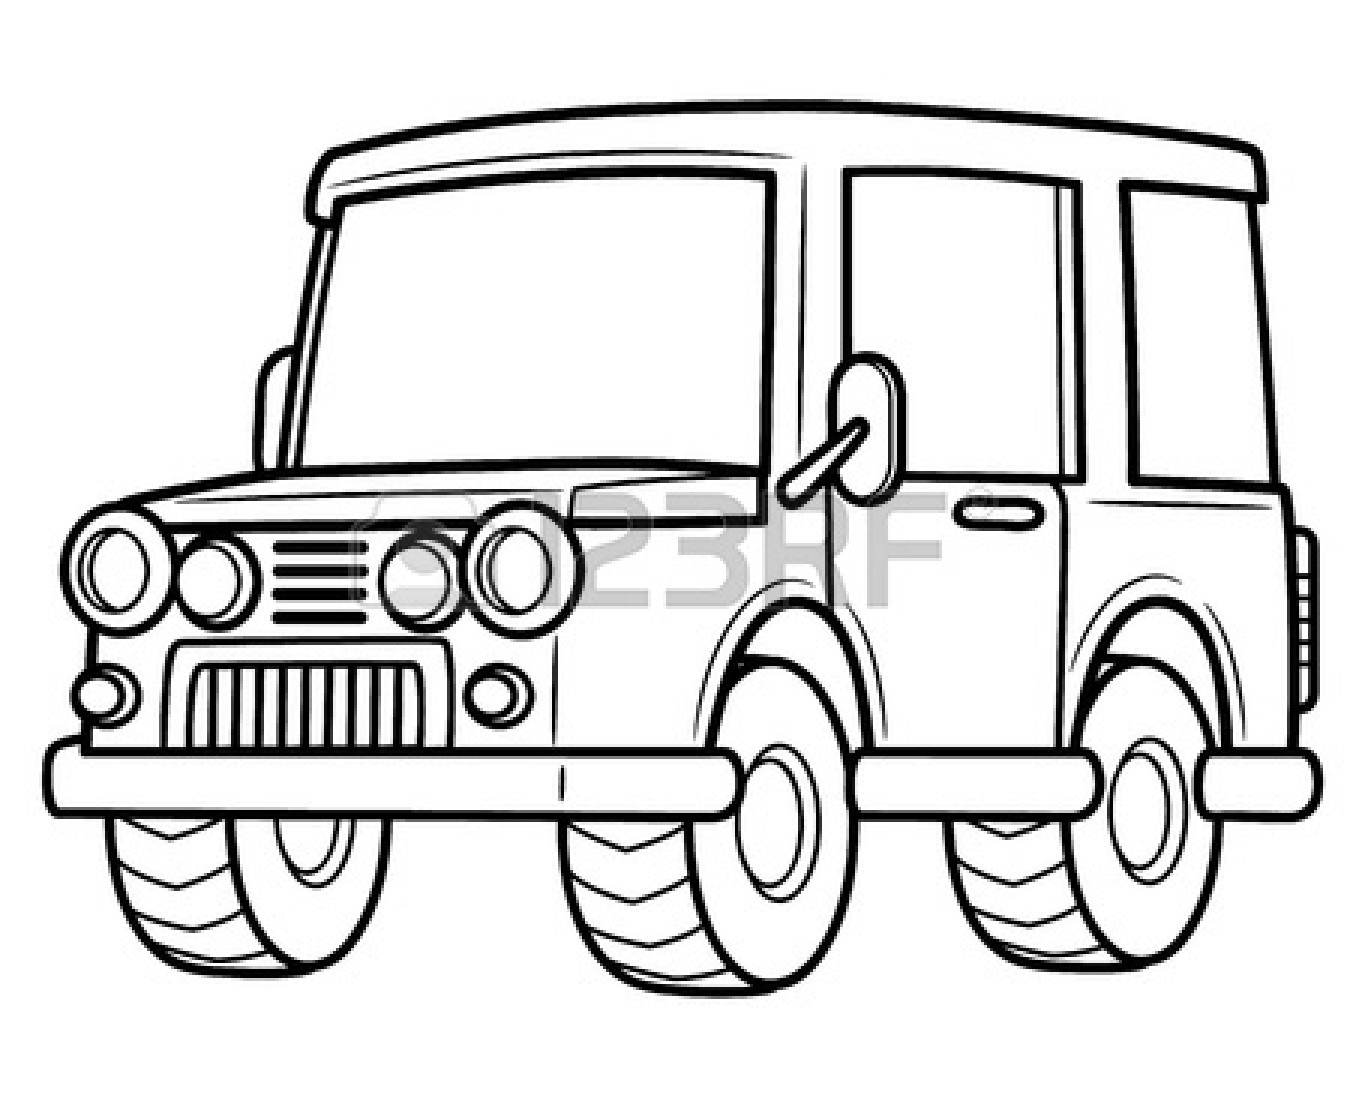 Toy Truck Clipart Black And White   Clipart Panda   Free Clipart